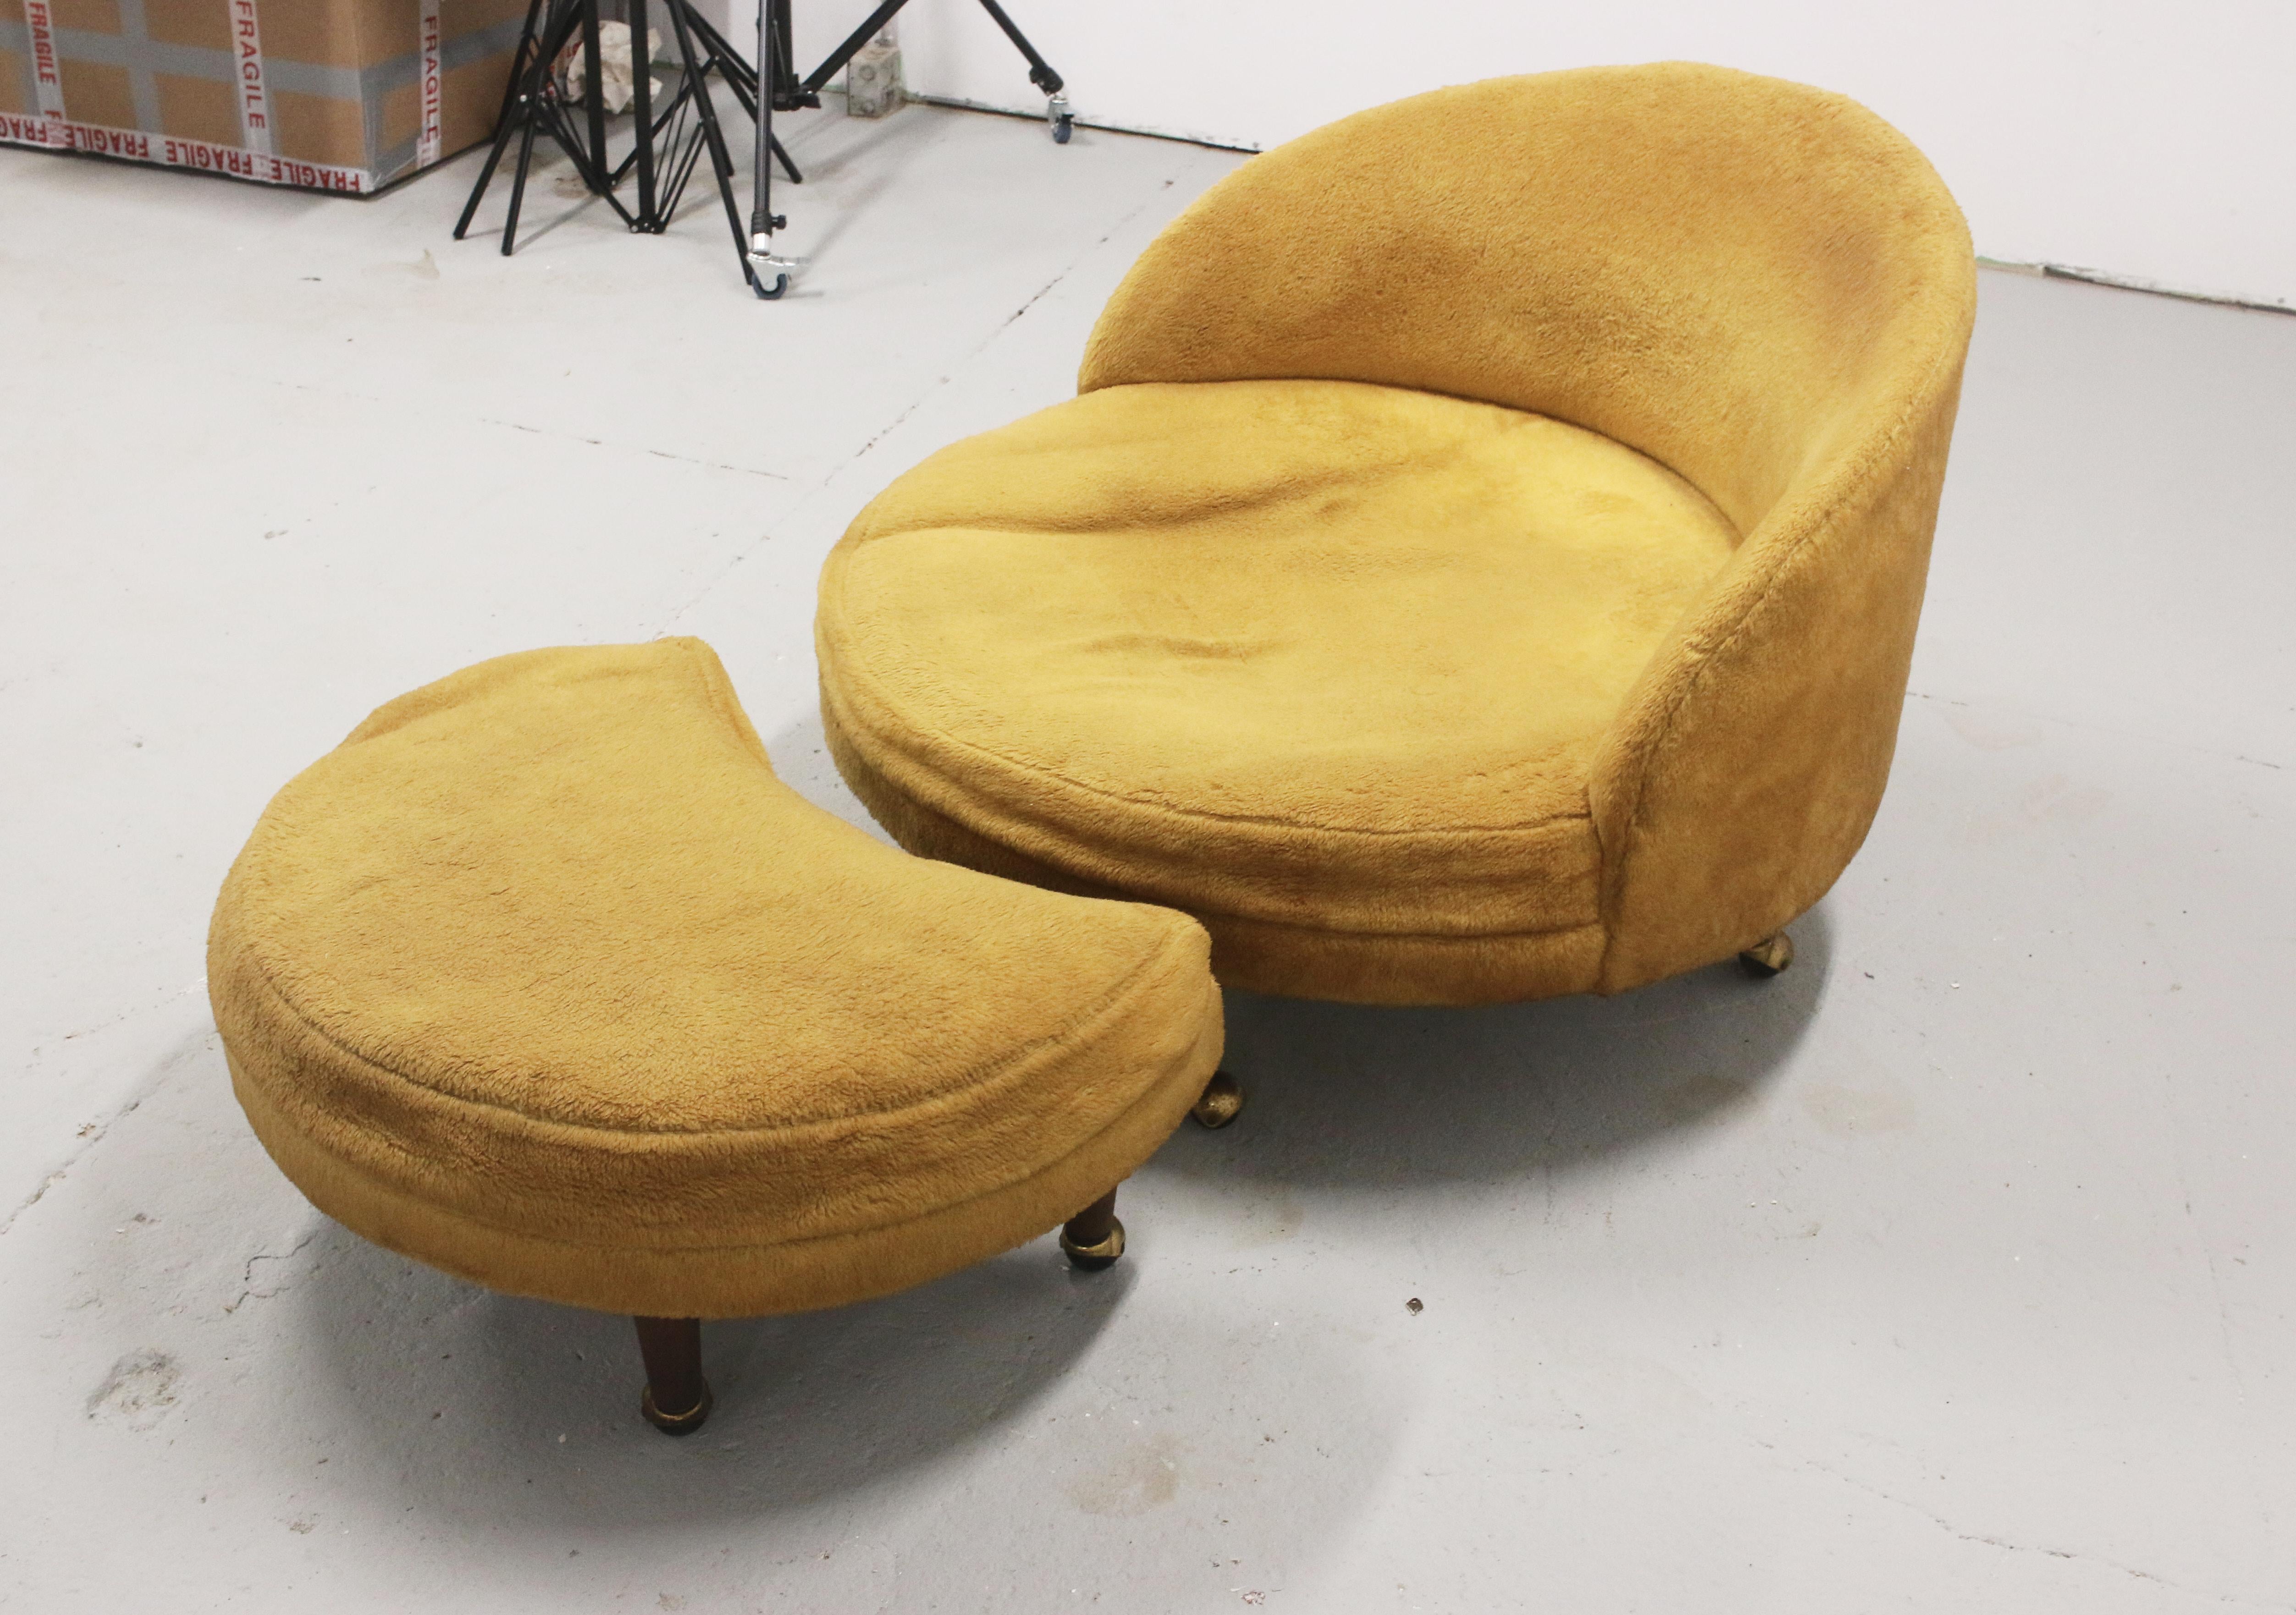 American Rare Adrian Pearsall Round Havana Chair and Ottoman, 1960s, for Re-Upholstery